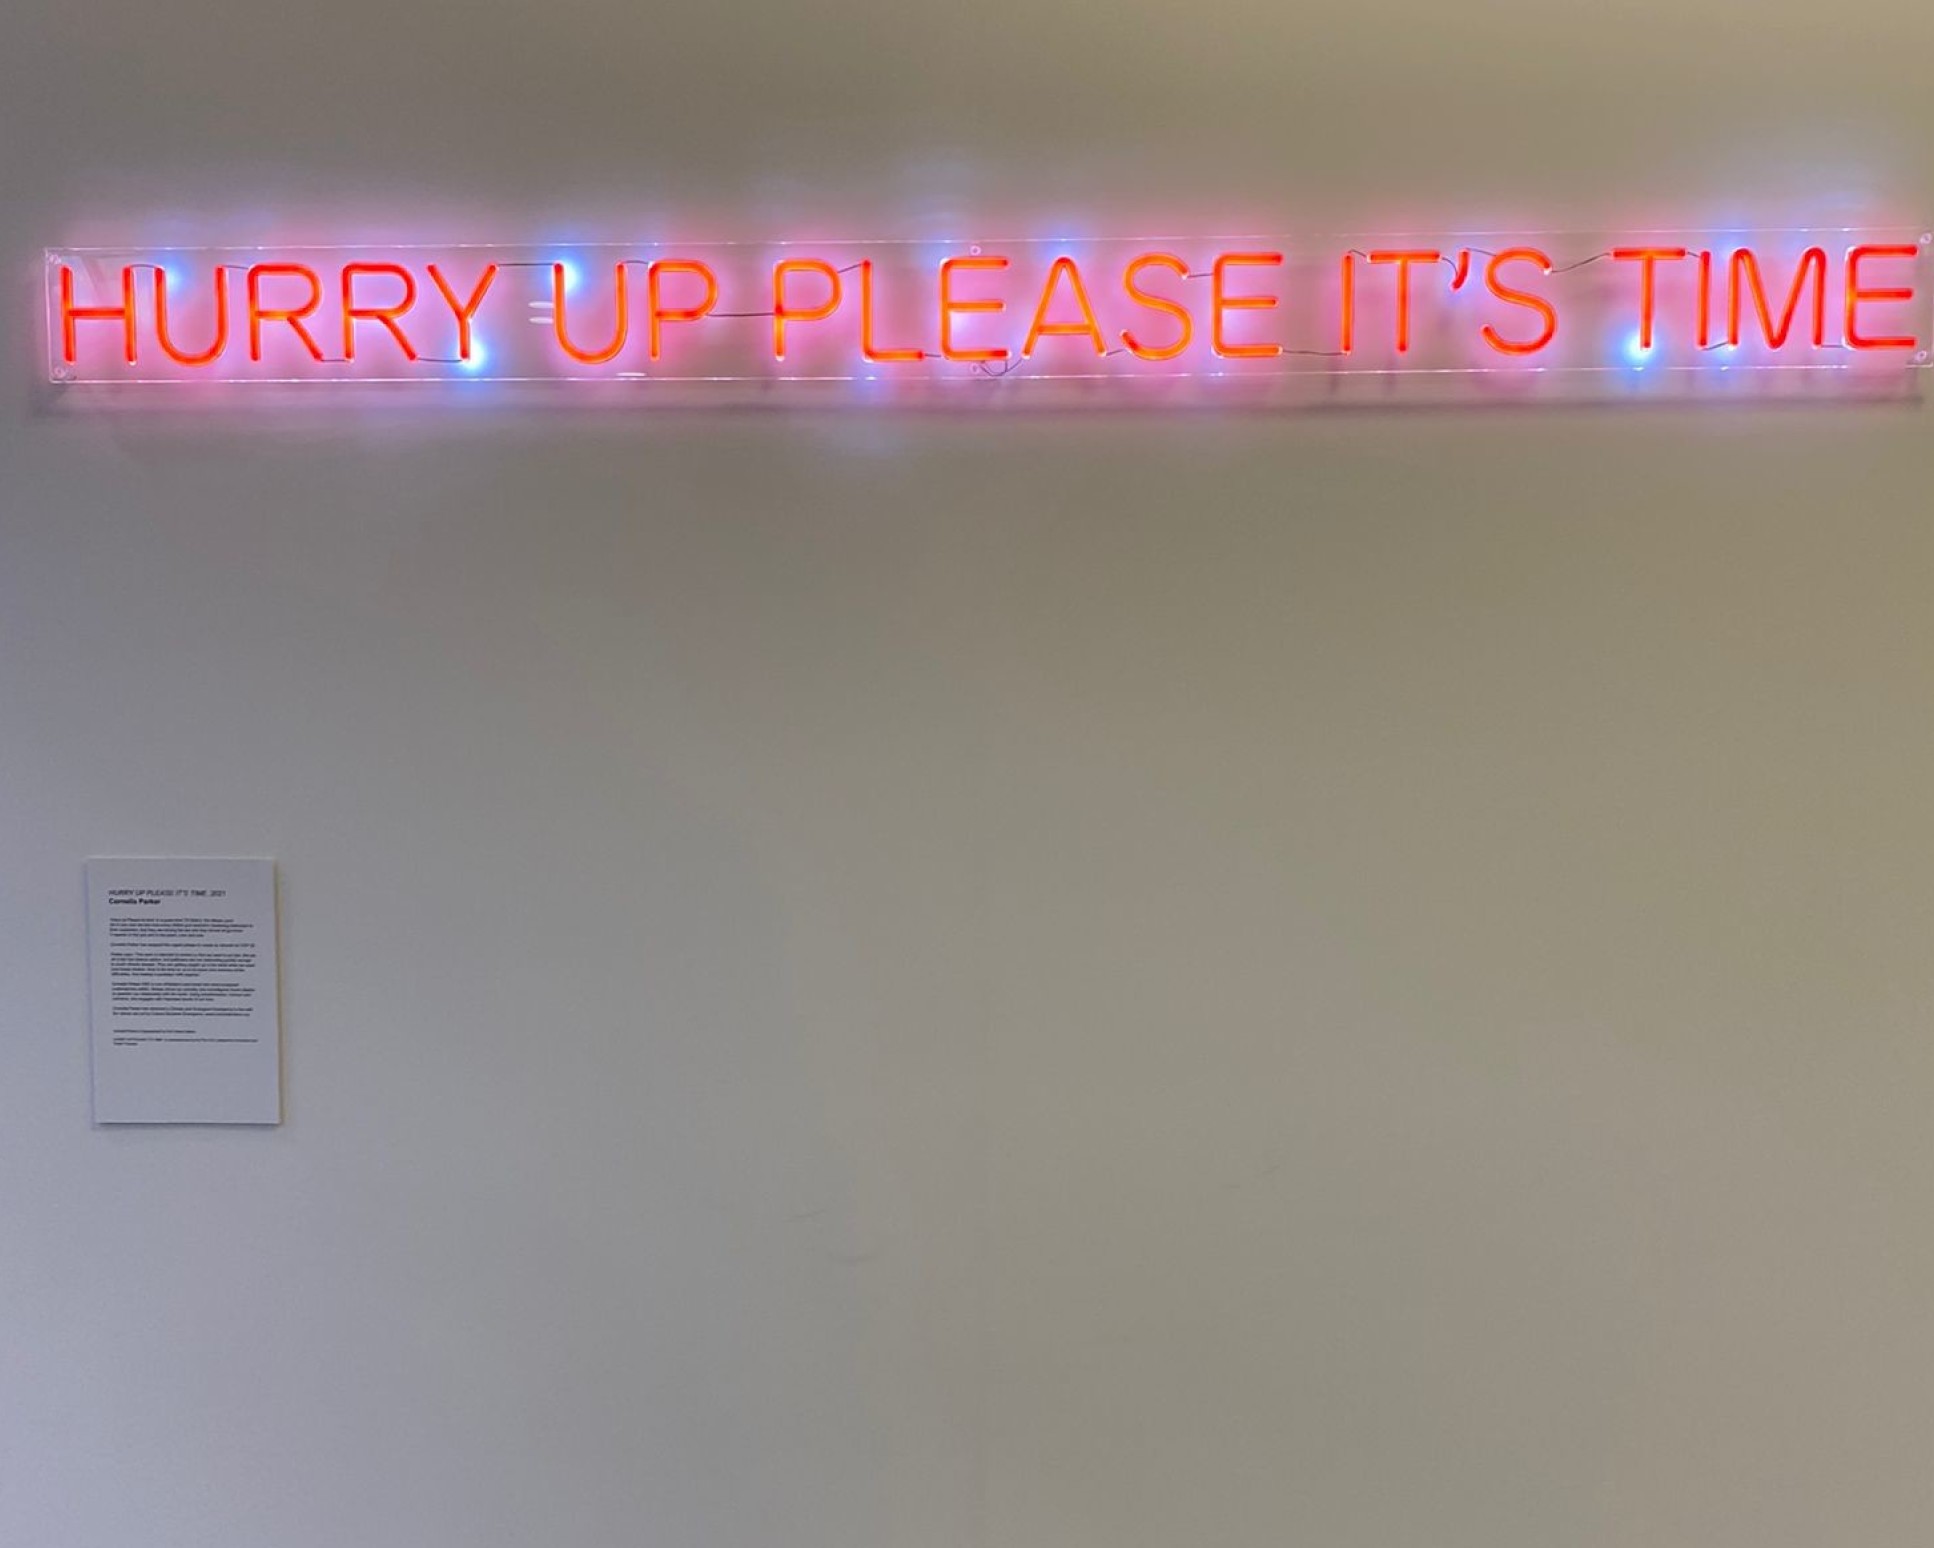 image of a white wall with glow writing 'Hurry up please it's time'